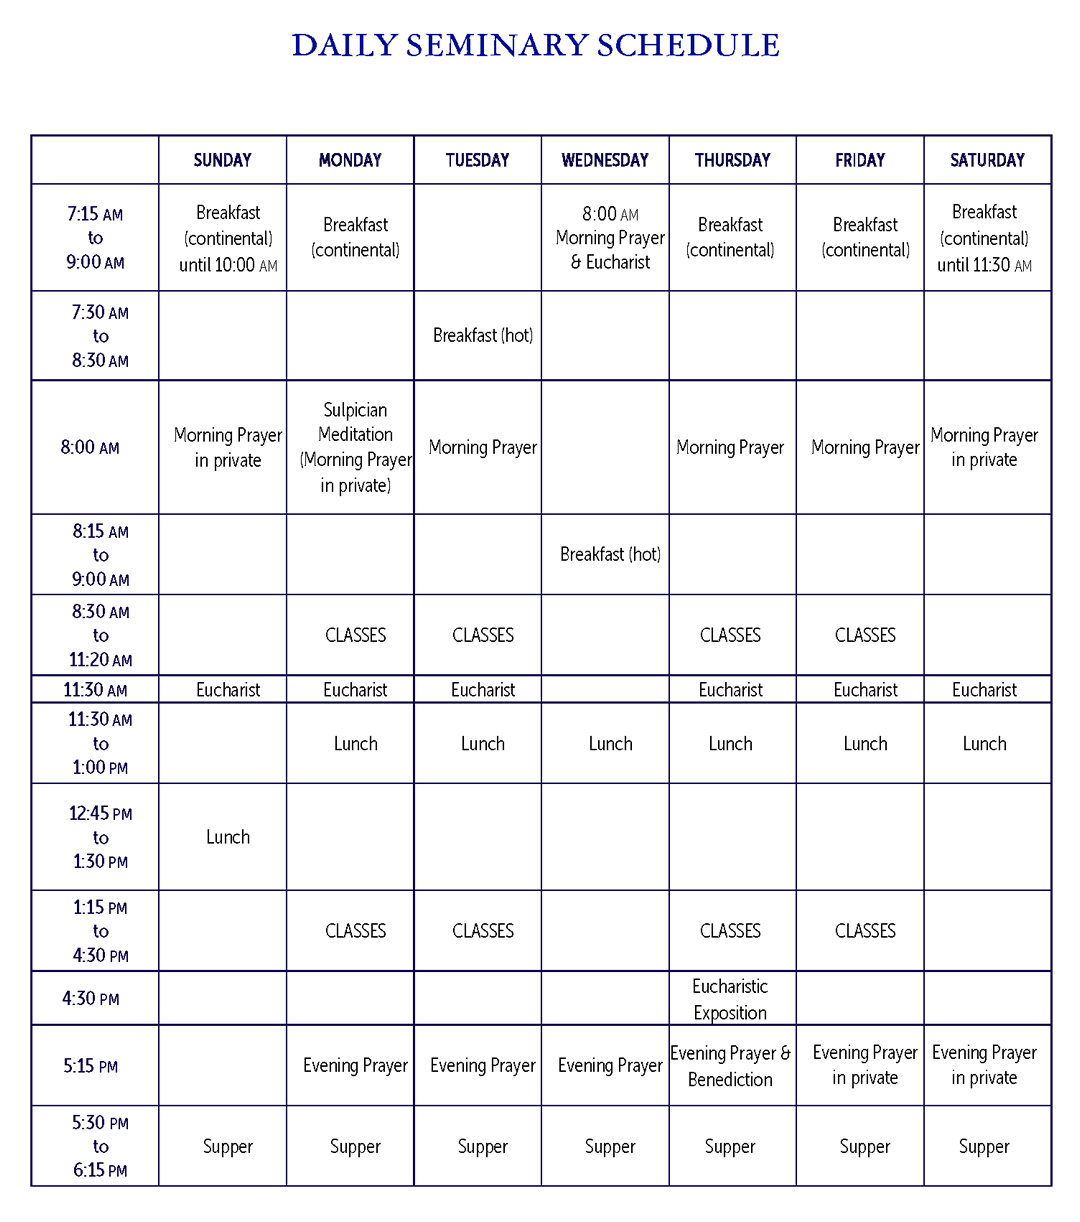 Image of Daily Seminary Schedule table